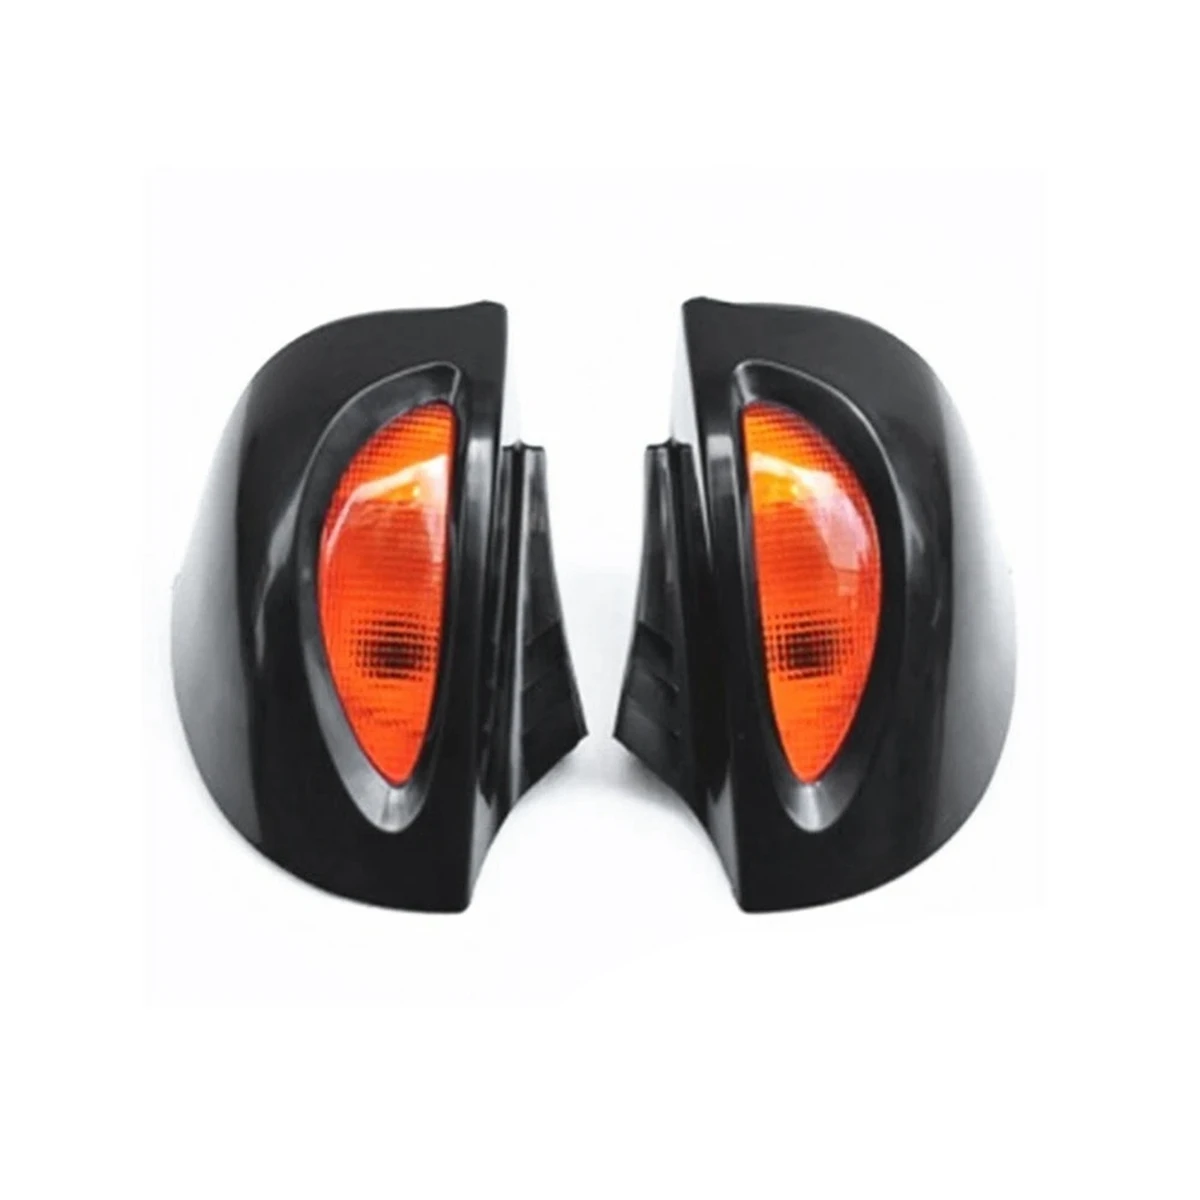 

Black Motorcycle Rear View Mirrors Turn Signals Lights Cover Motocross Mirror for -BMW R1100 RT R1100 RTP R1150 RT